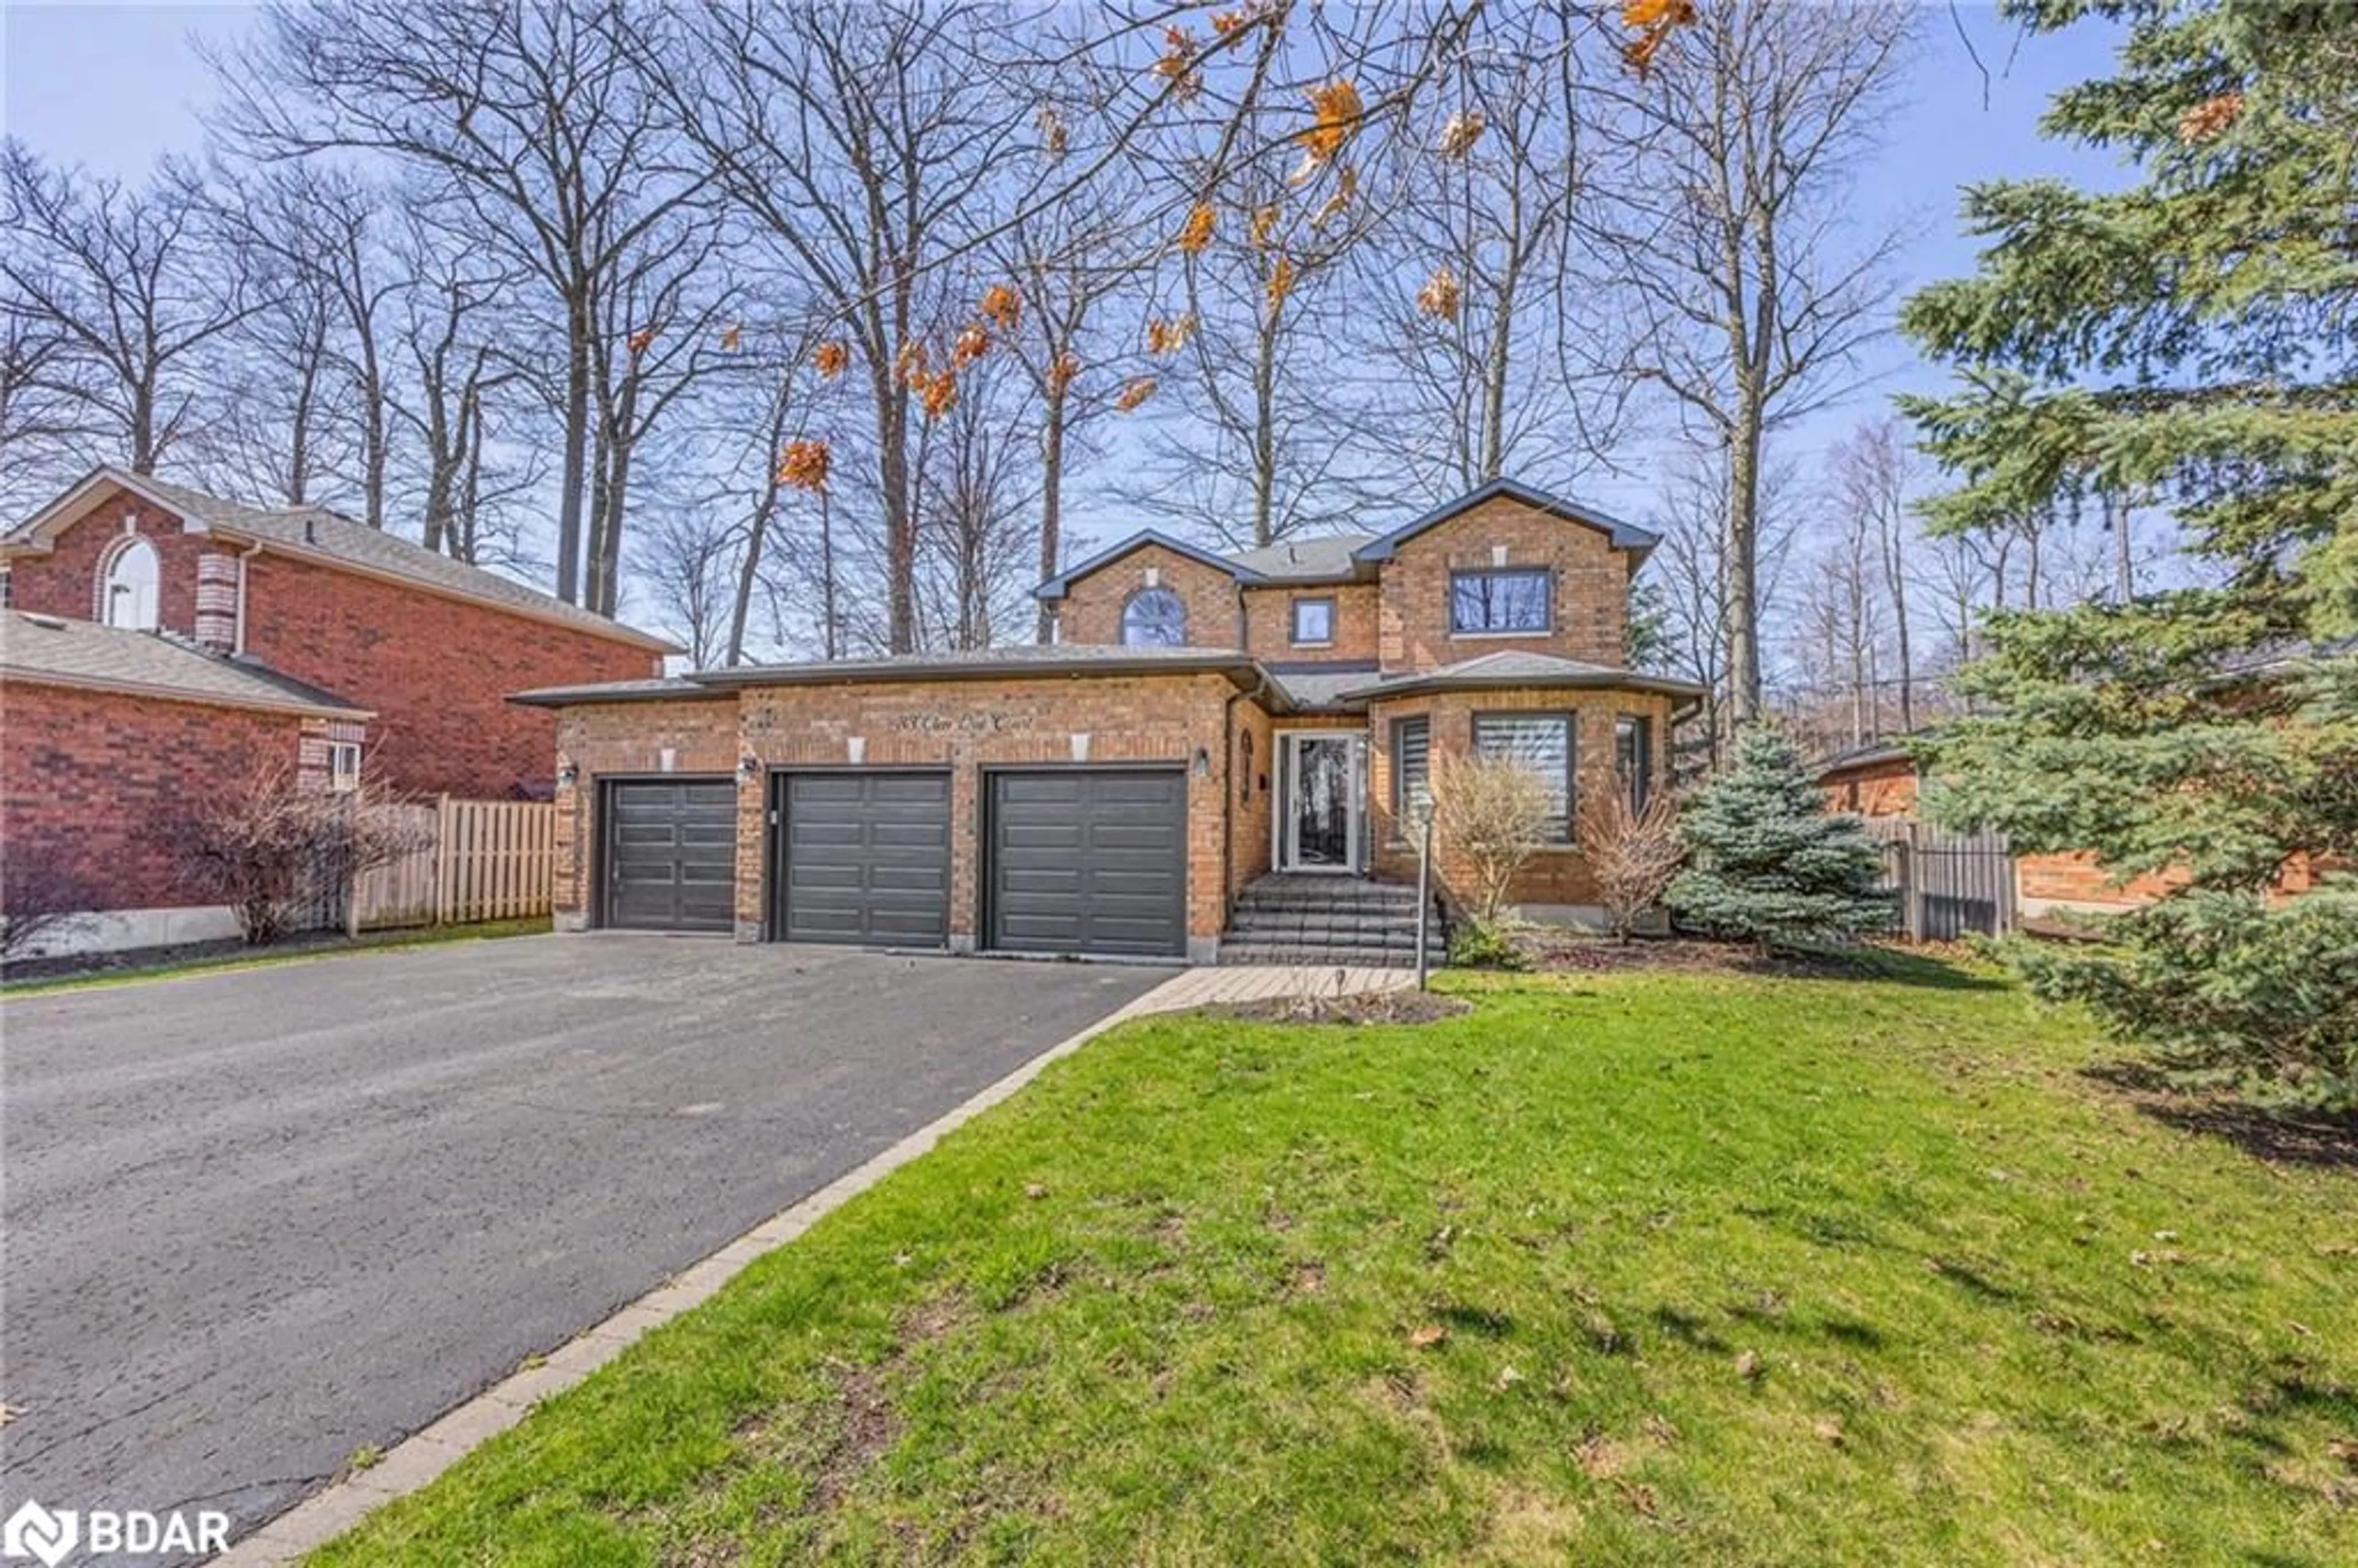 Home with brick exterior material for 33 Glen Oak Crt, Barrie Ontario L4M 6M4